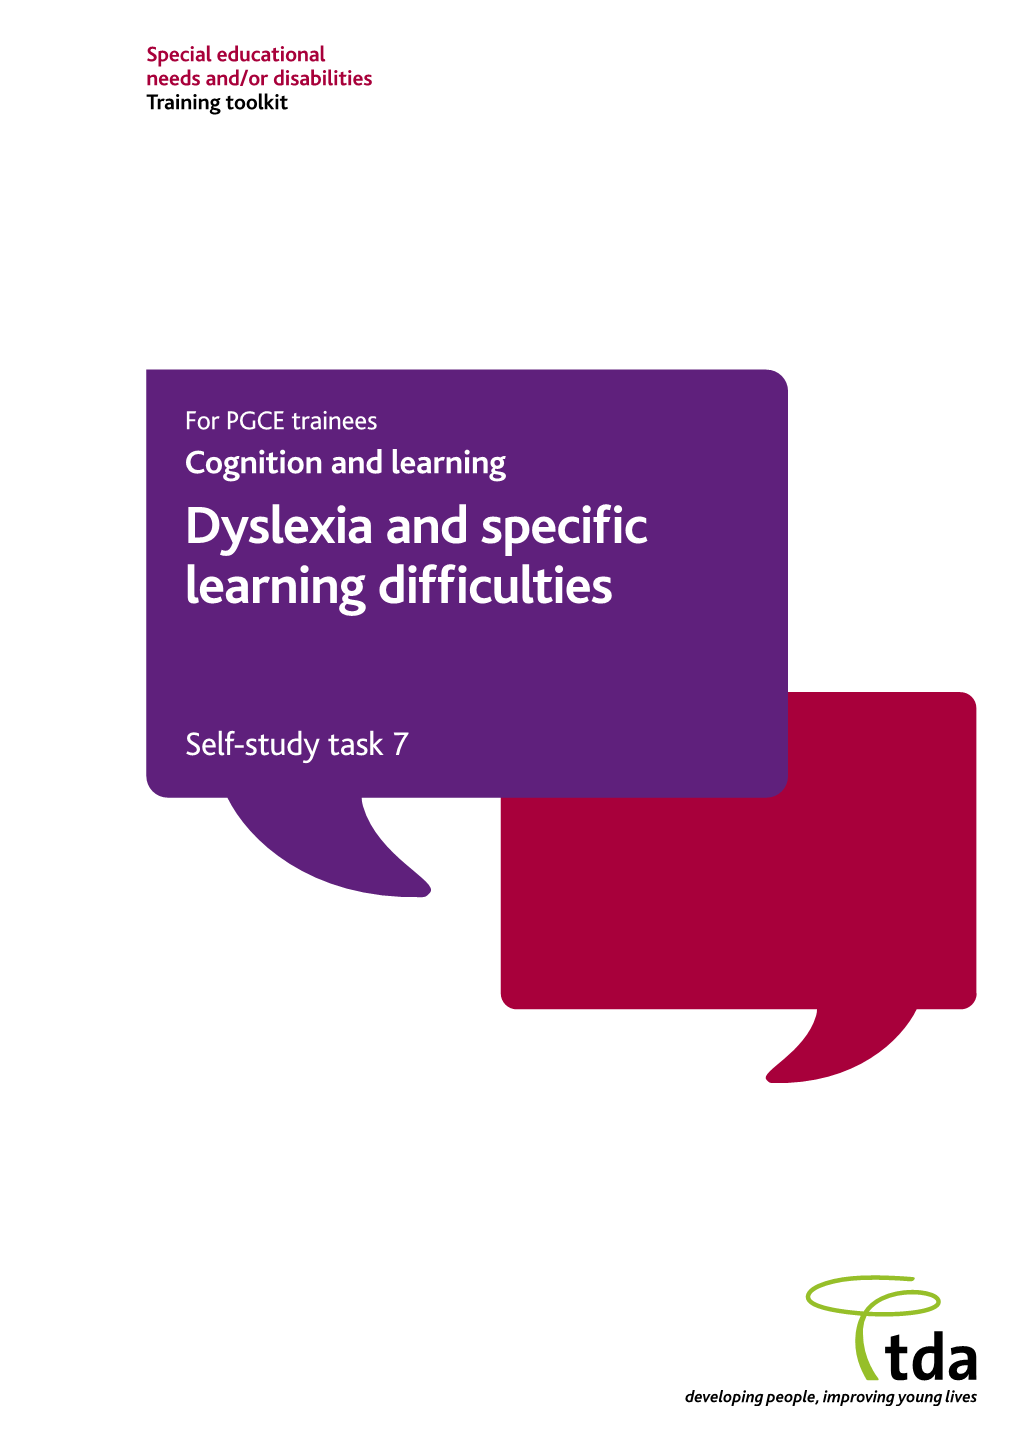 Dyslexia and Specific Learning Difficulties – Self-Study Task 7